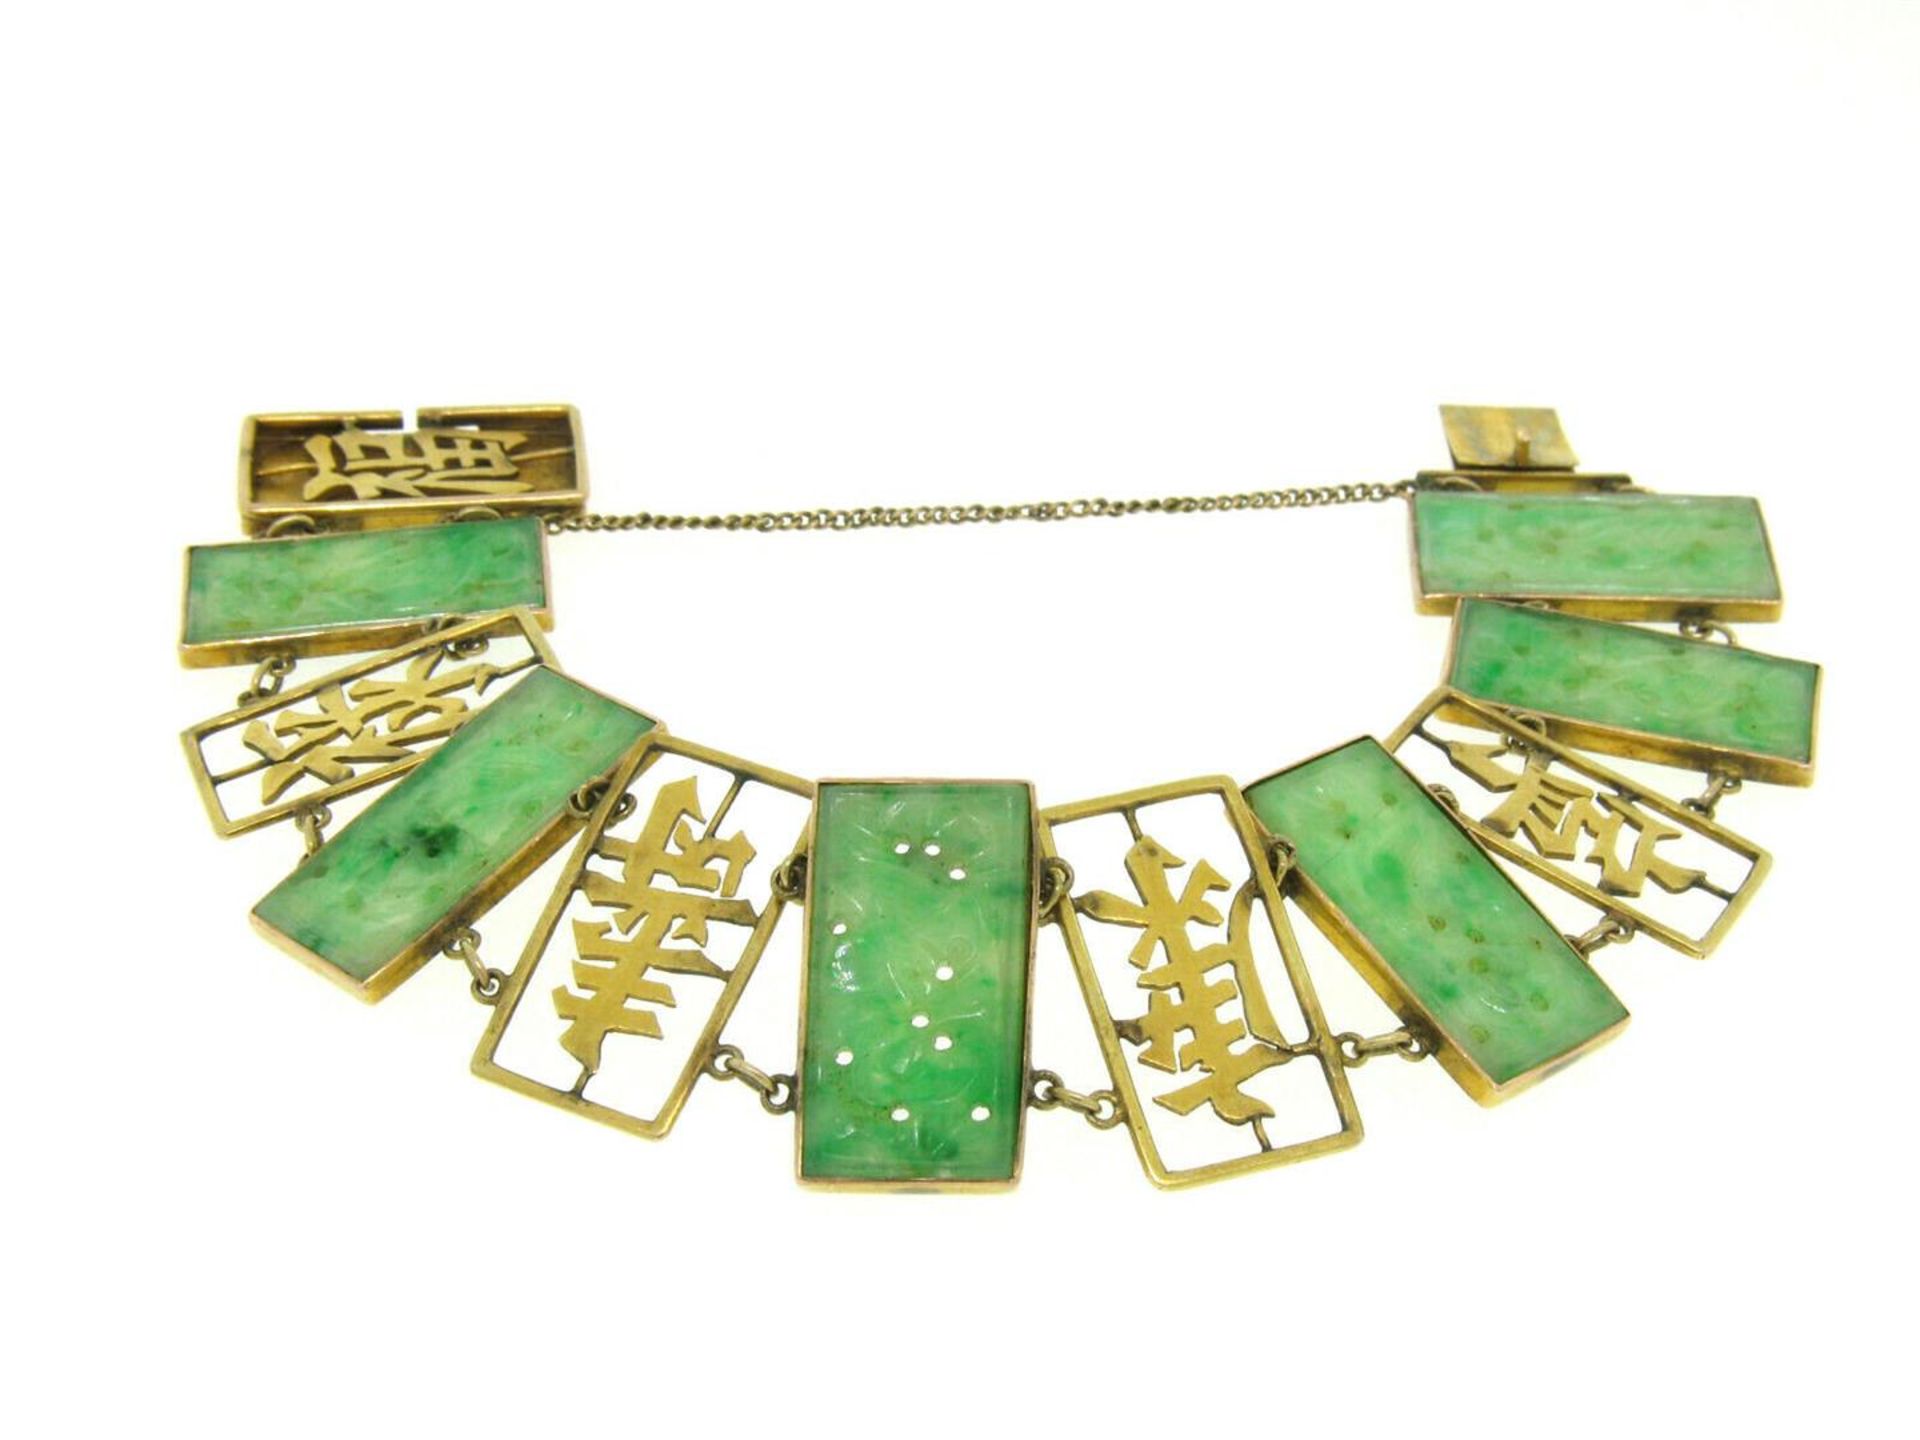 Antique Chinese Solid 14k Yellow Gold Large WIDE Hand Carved Jade Link Bracelet - Image 3 of 6